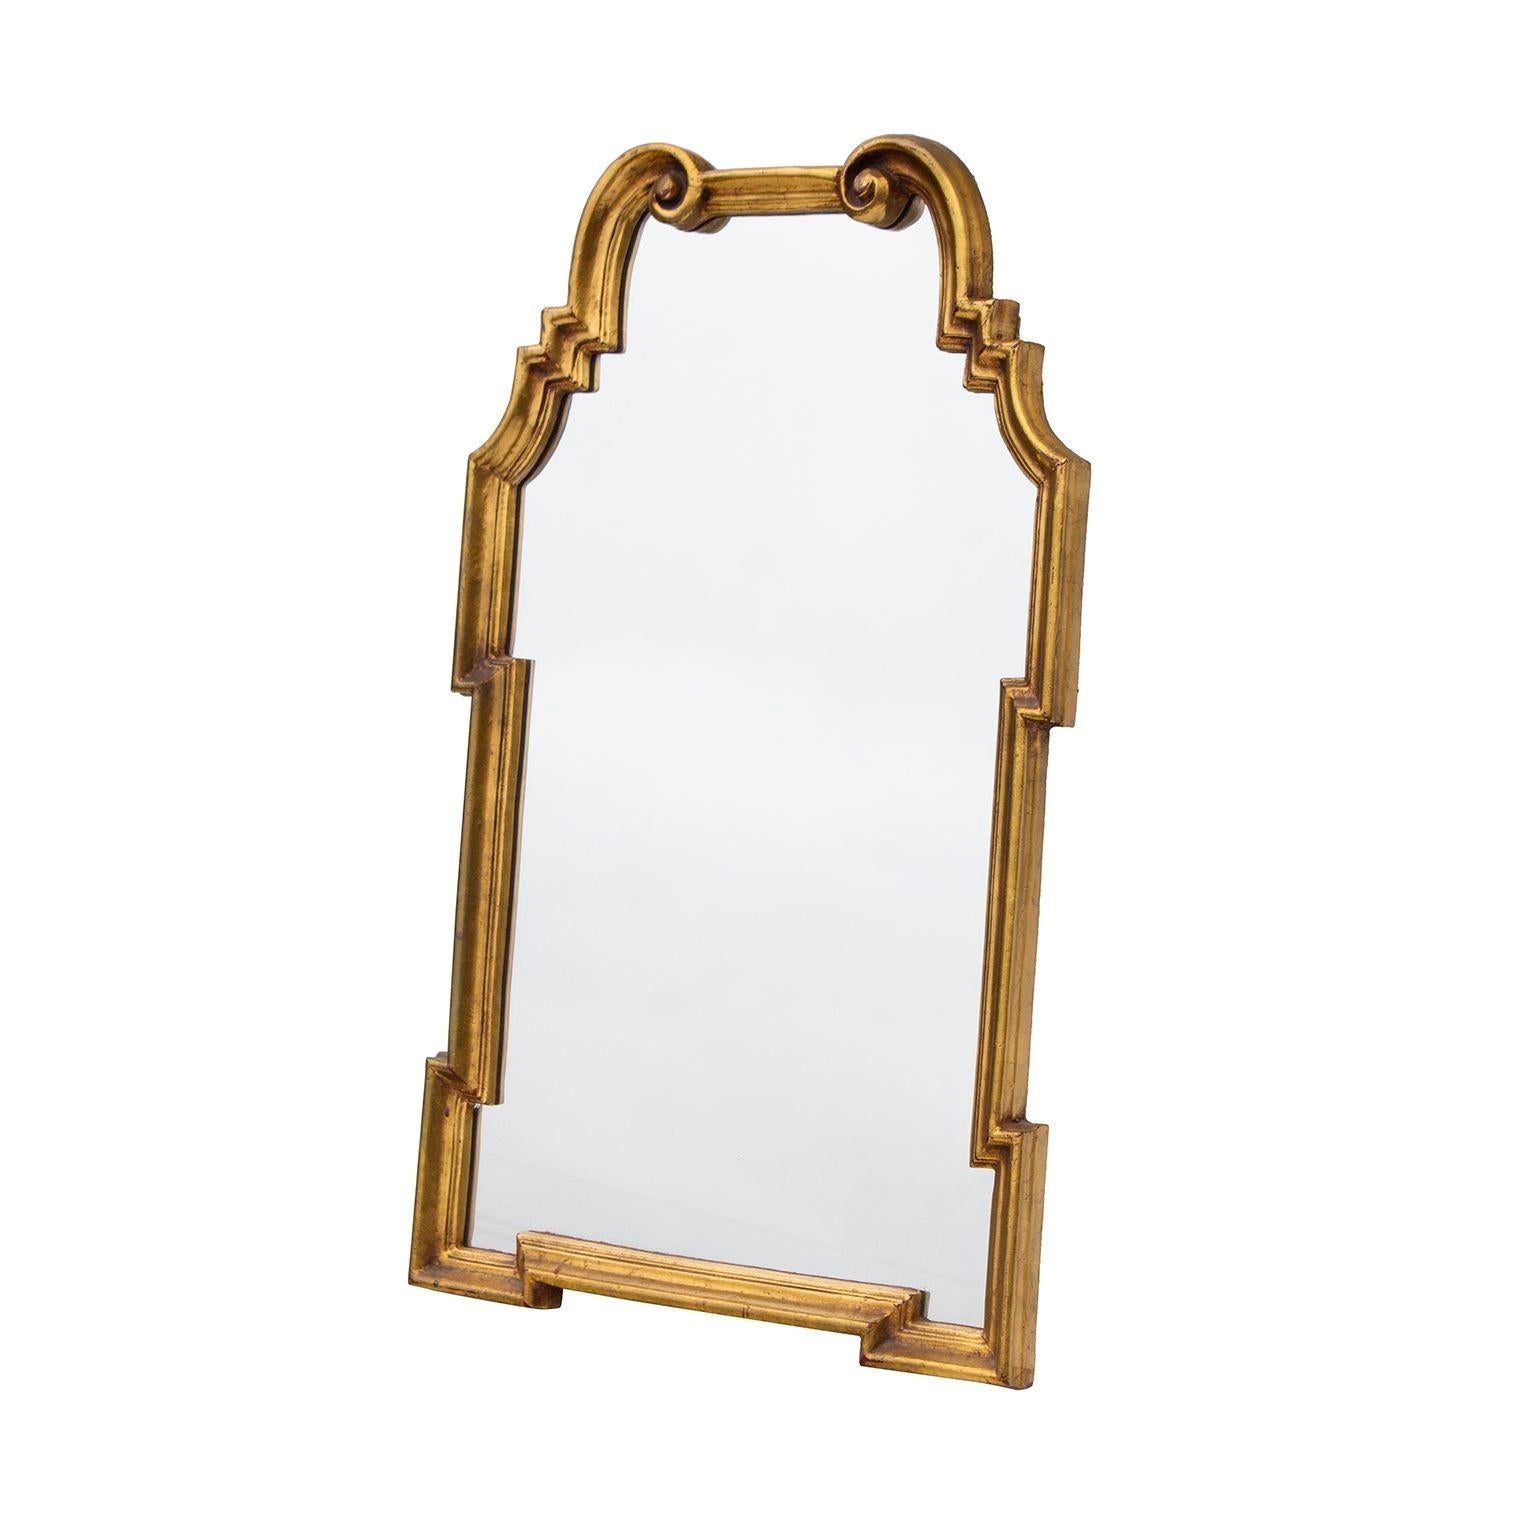 Italian Giltwood Scrolled Arch Keyhole Gold Mirror by La Barge, 1970s In Good Condition For Sale In Grand Rapids, MI